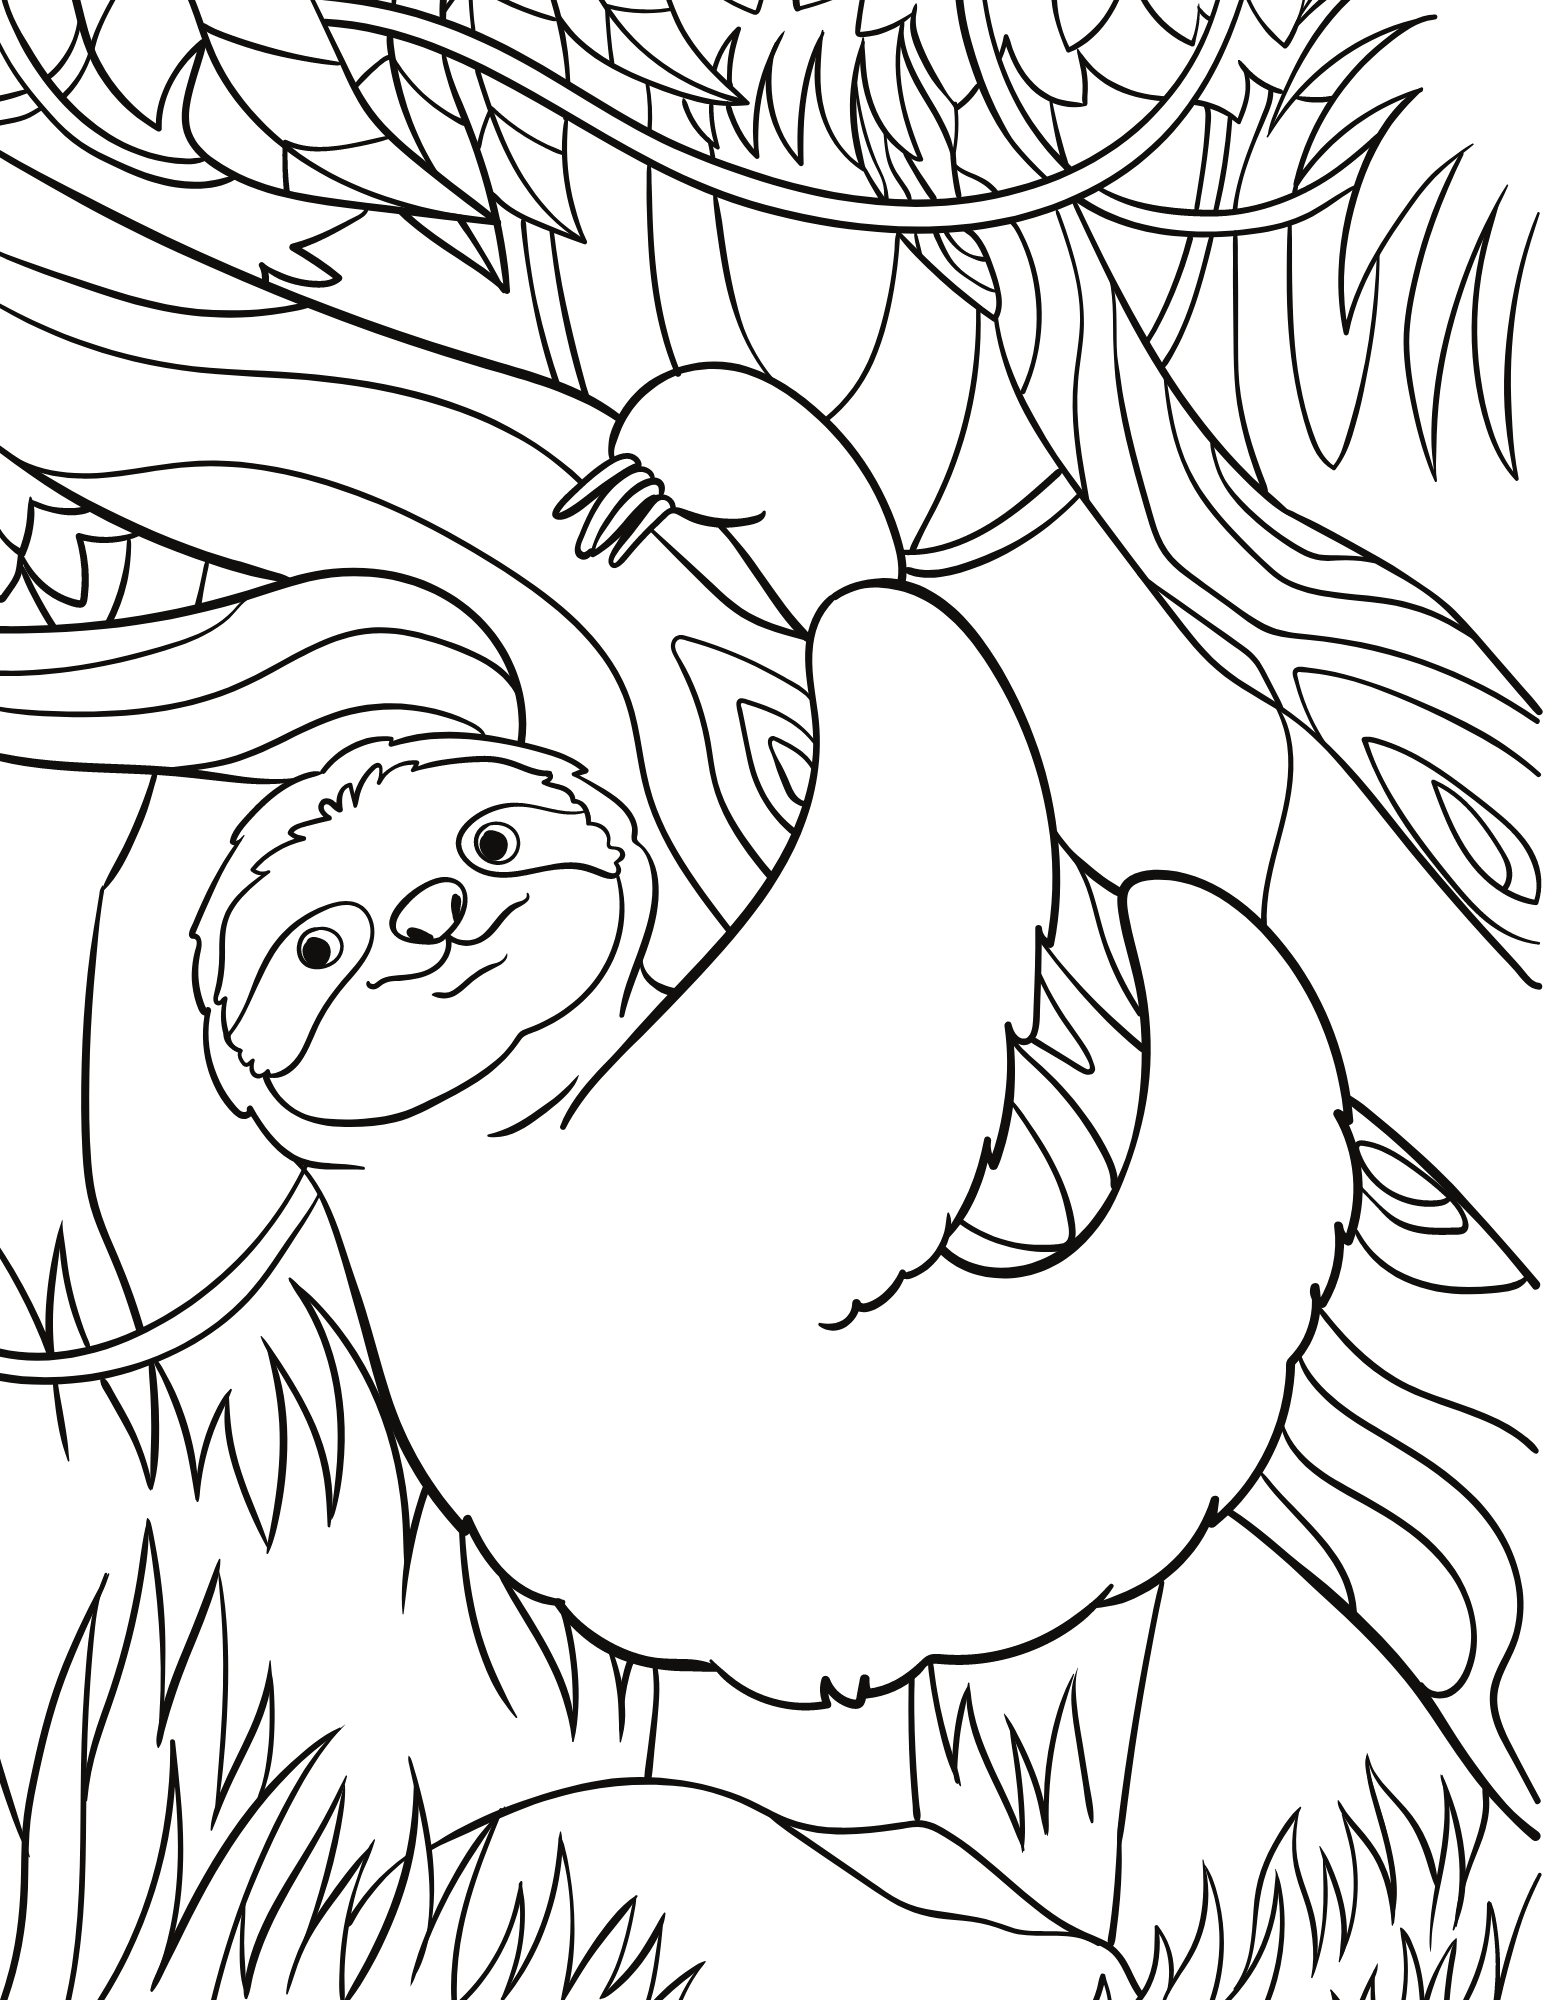 Free sloth coloring pages and fun facts about sloths